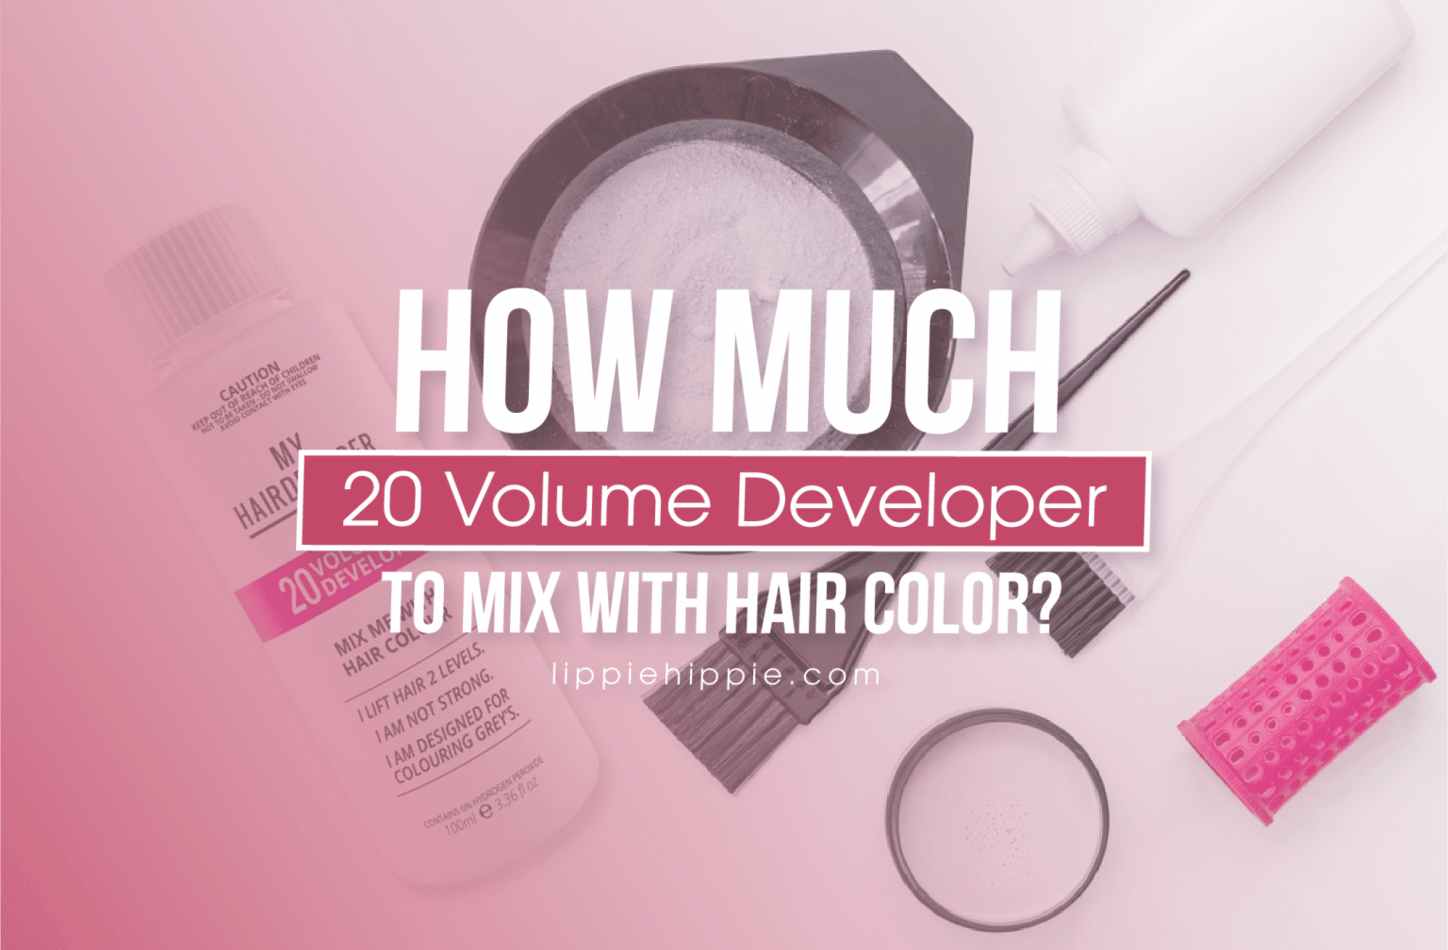 5. "The benefits of having blue hair as a developer" - wide 2